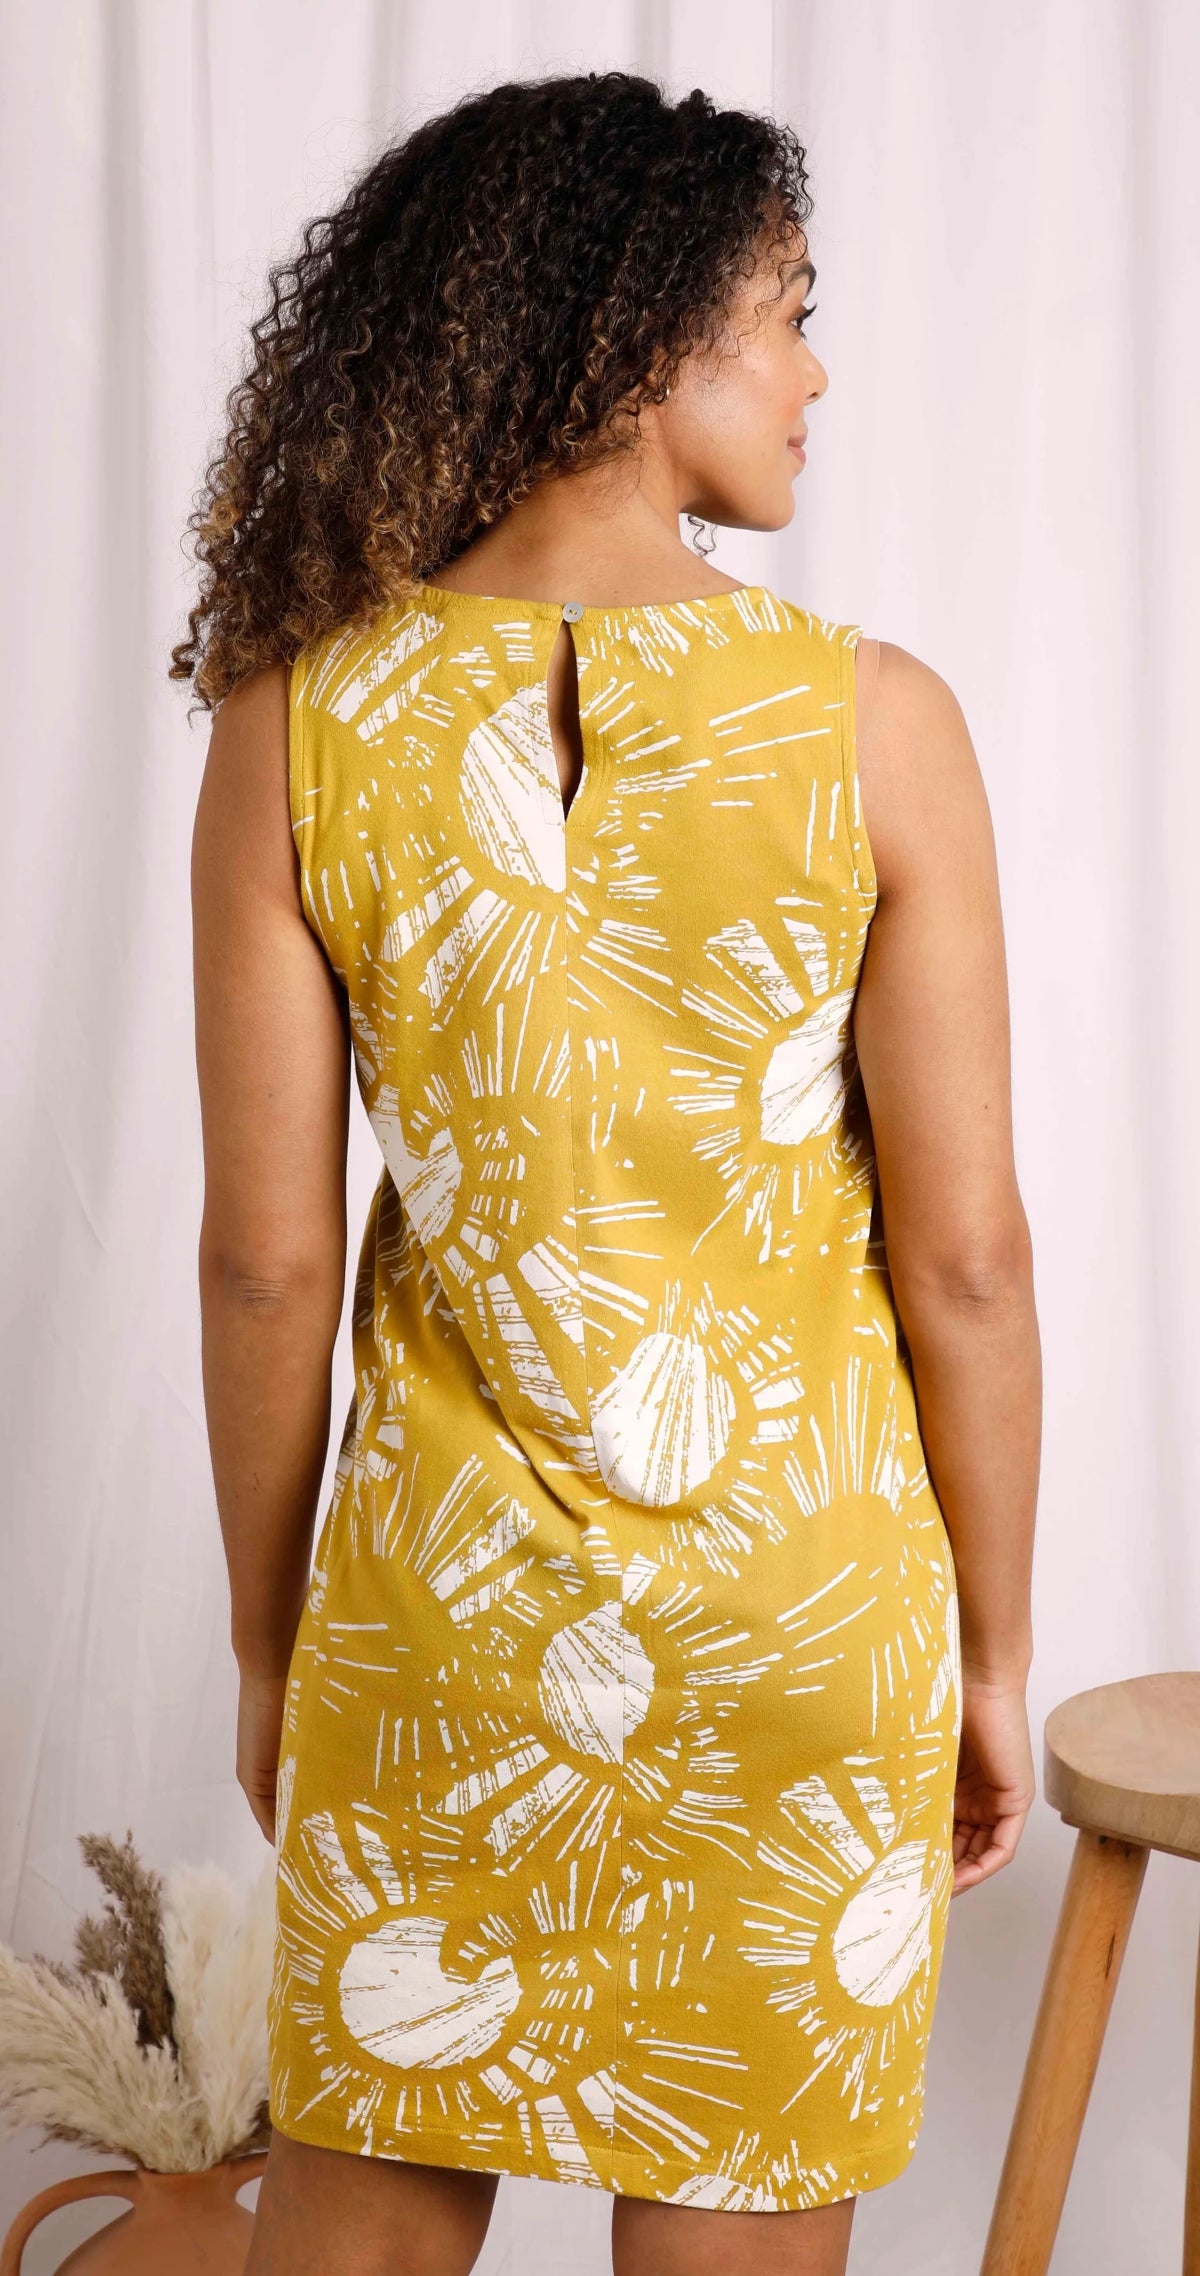 Women's Adena dress from Weird Fish in Warm Olive with a bold floral pattern.